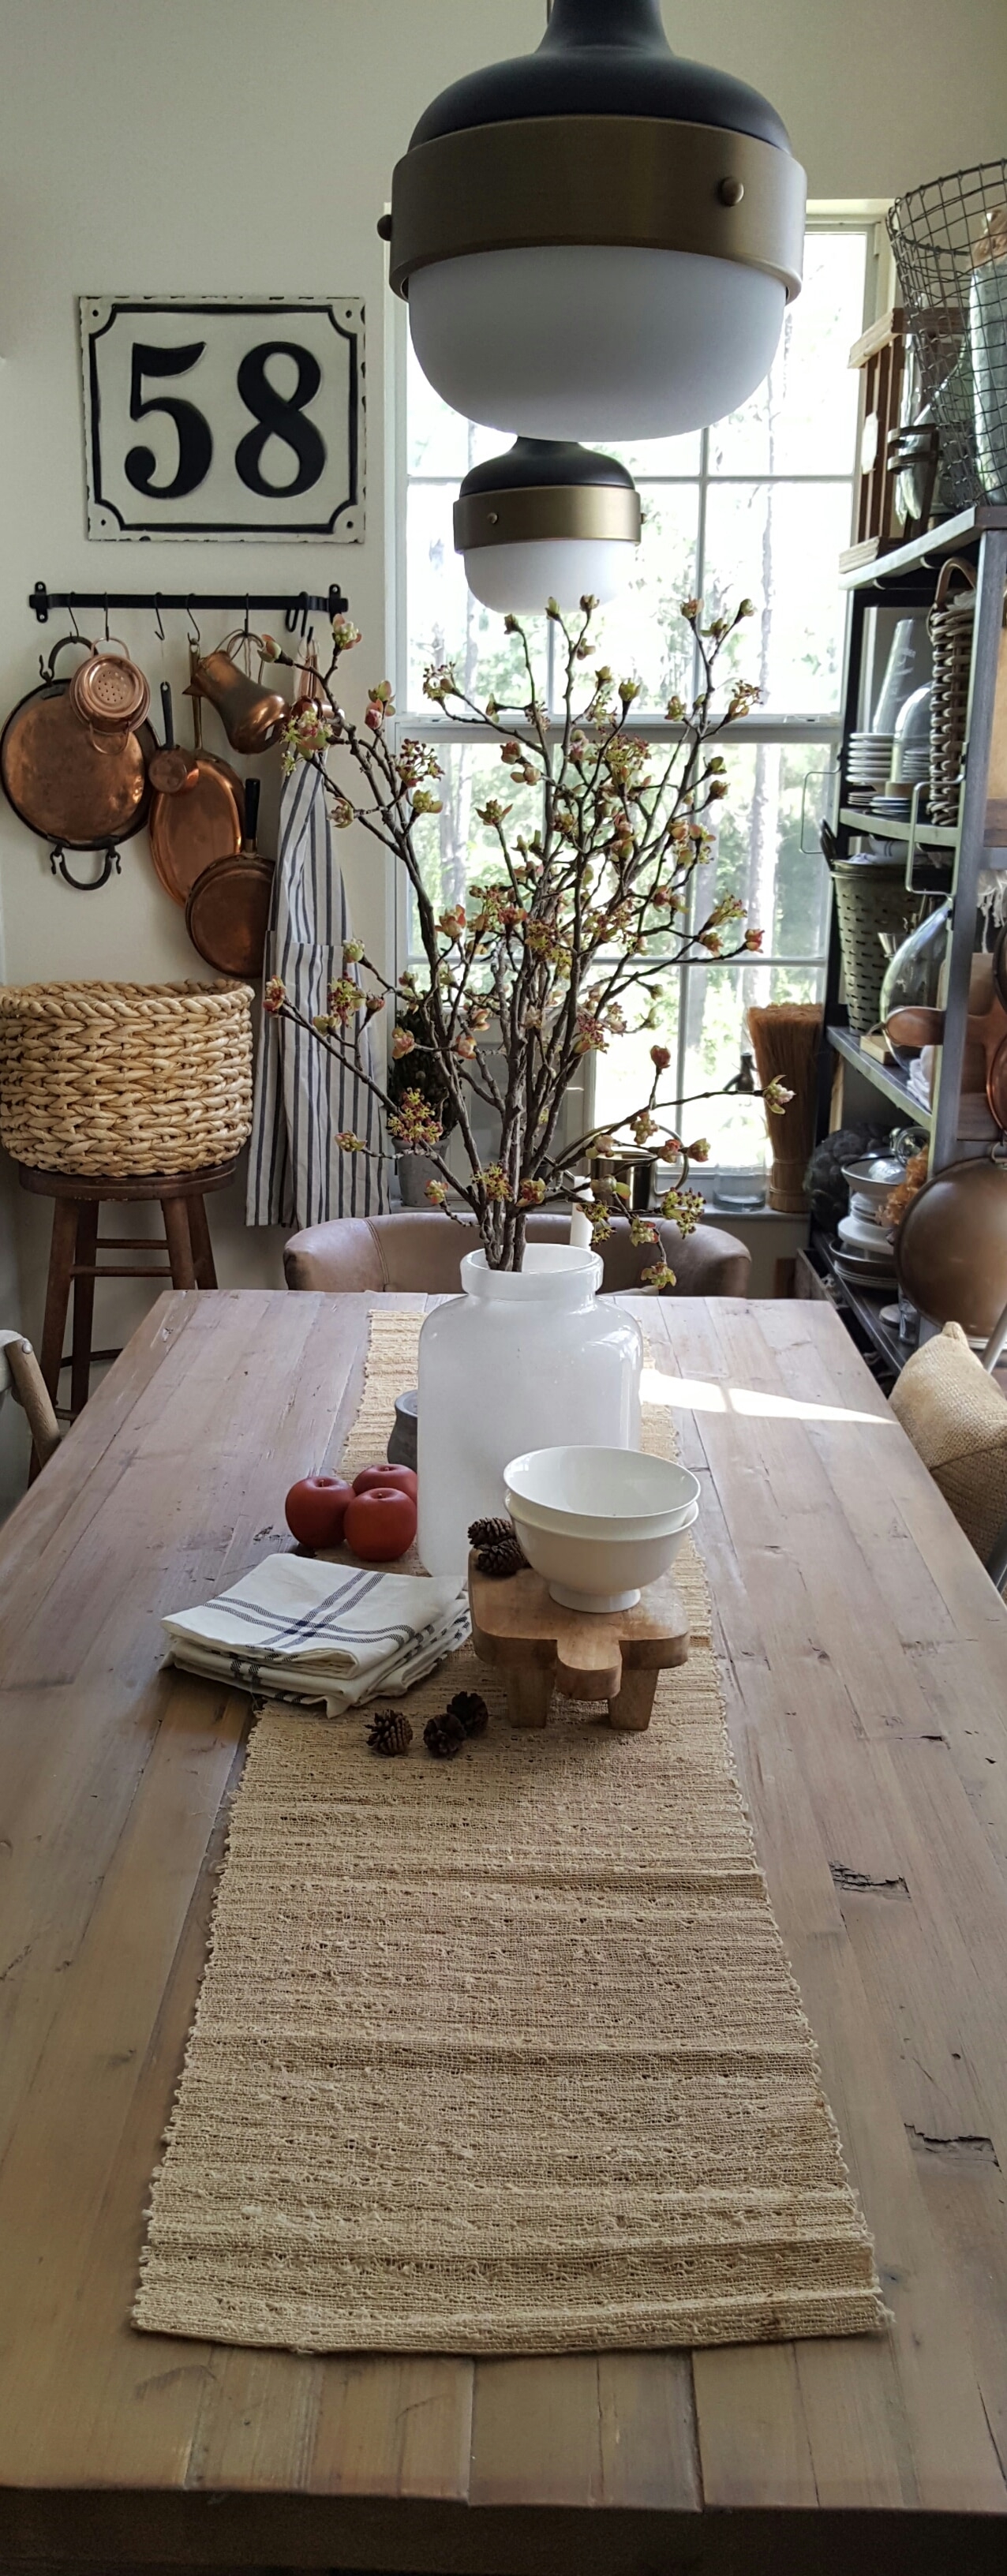 shop the house design challenge Fall Dining Table Decor apples and blossoms